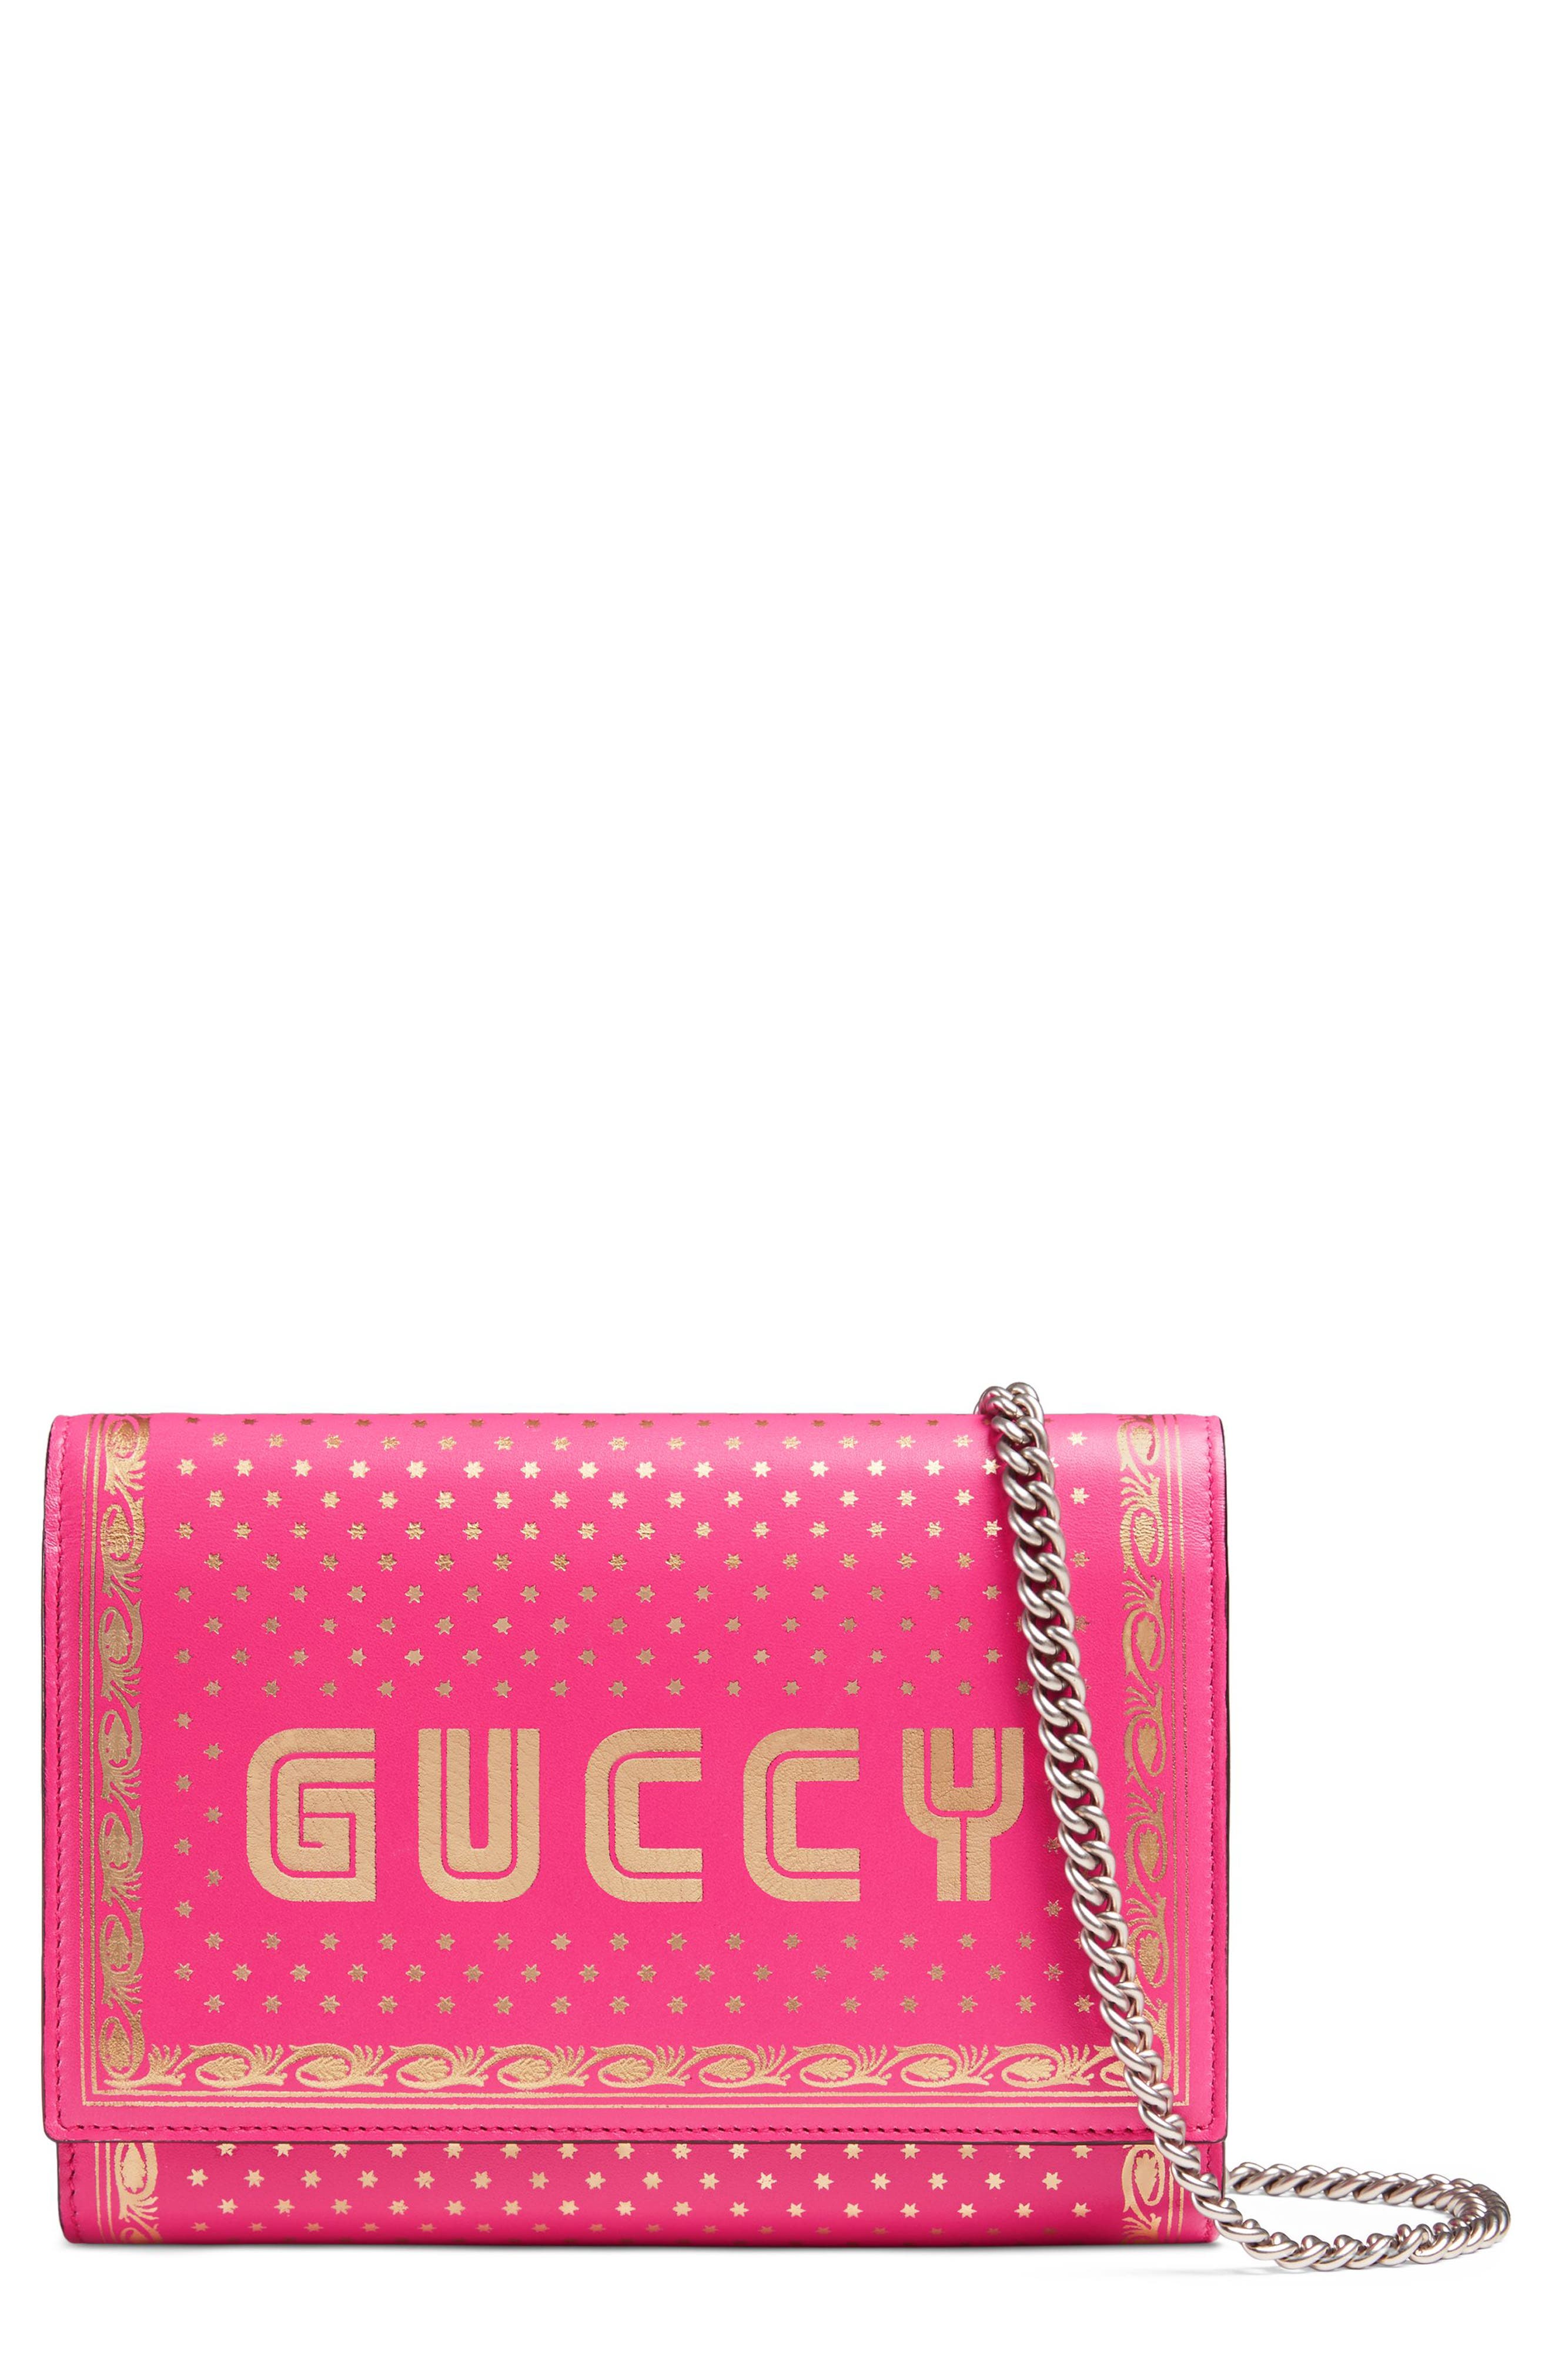 nordstrom gucci wallet on chain